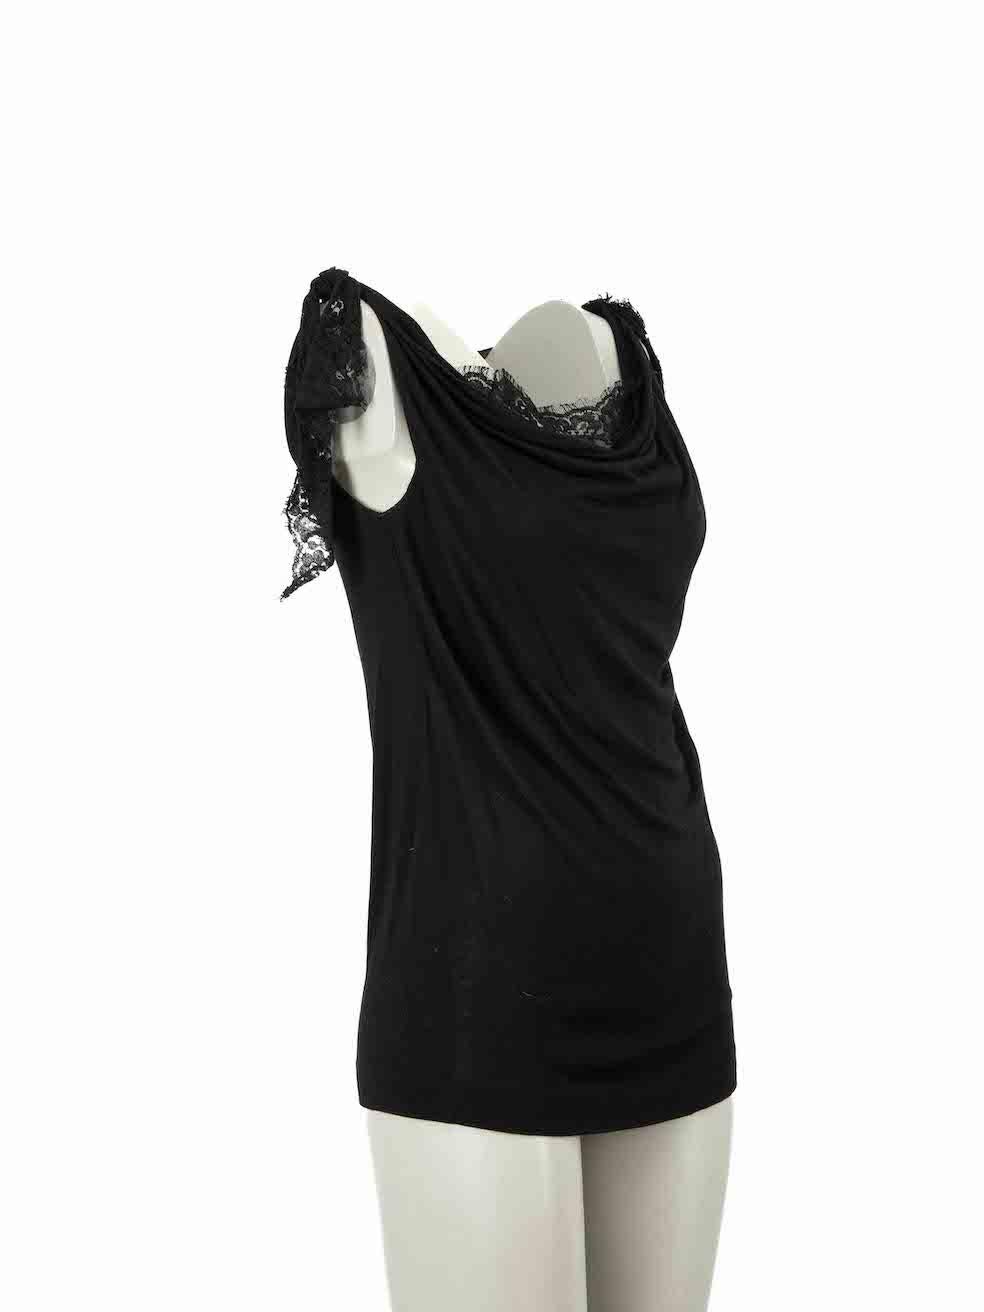 CONDITION is Very good. Minimal wear to top is evident. Minimal wear to lace detailing with a number of small thread pulls seen at the shoulders on this used Dolce & Gabbana designer resale item.
 
Details
Black
Viscose
Sleeveless tank top
Slightly